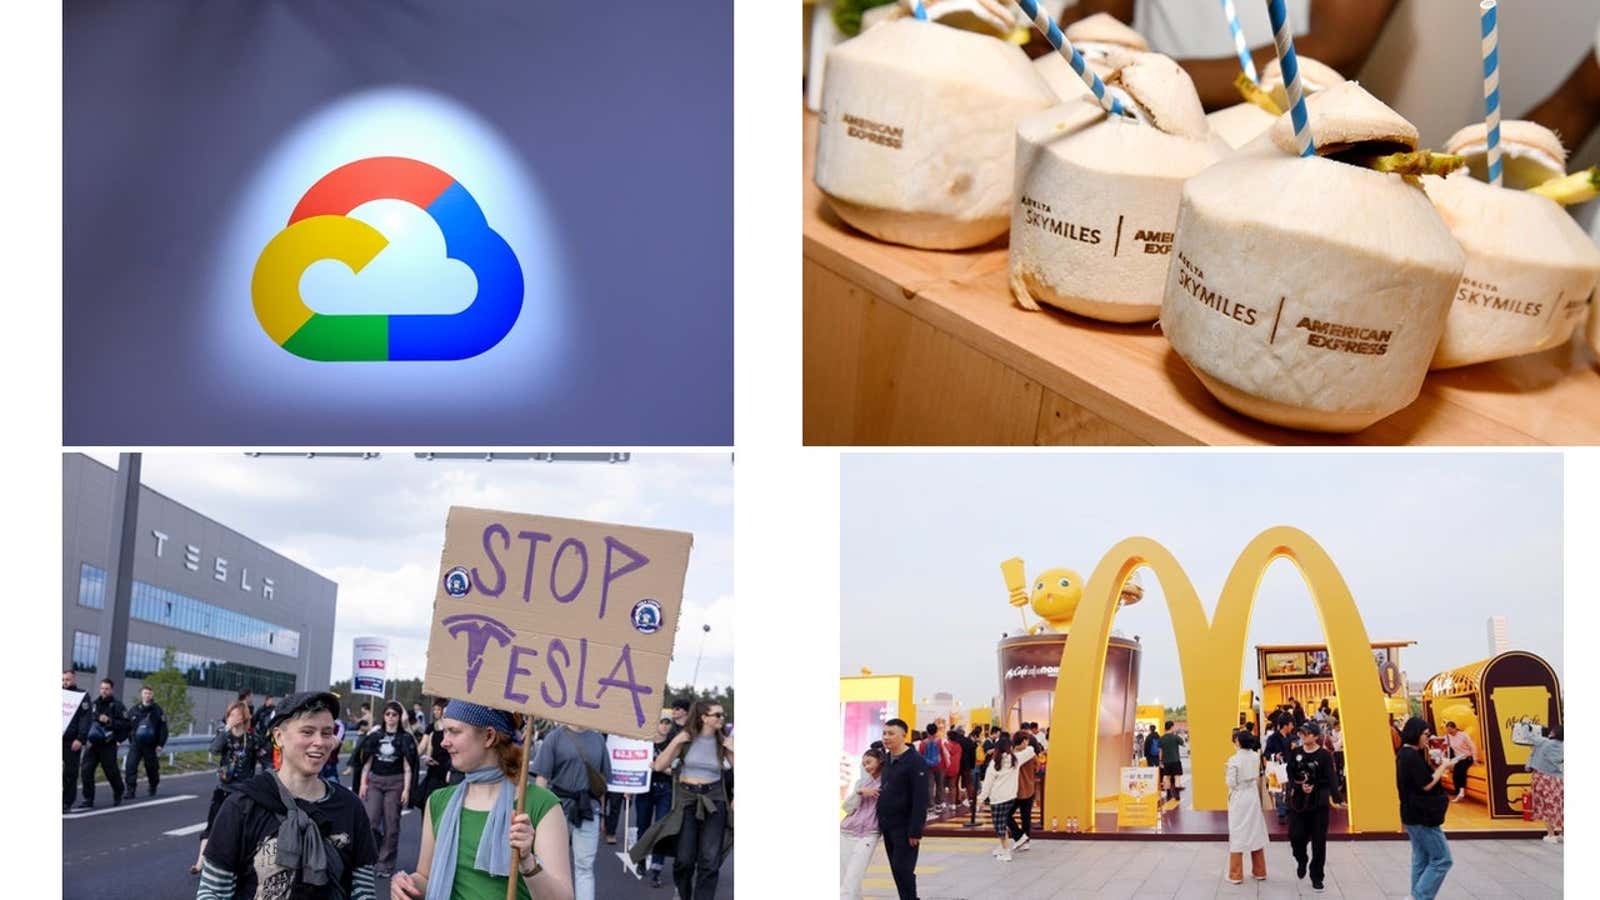 Image for Google's $125 billion mistake, the Tesla divide, McDonald's new deal: The week's most popular stories